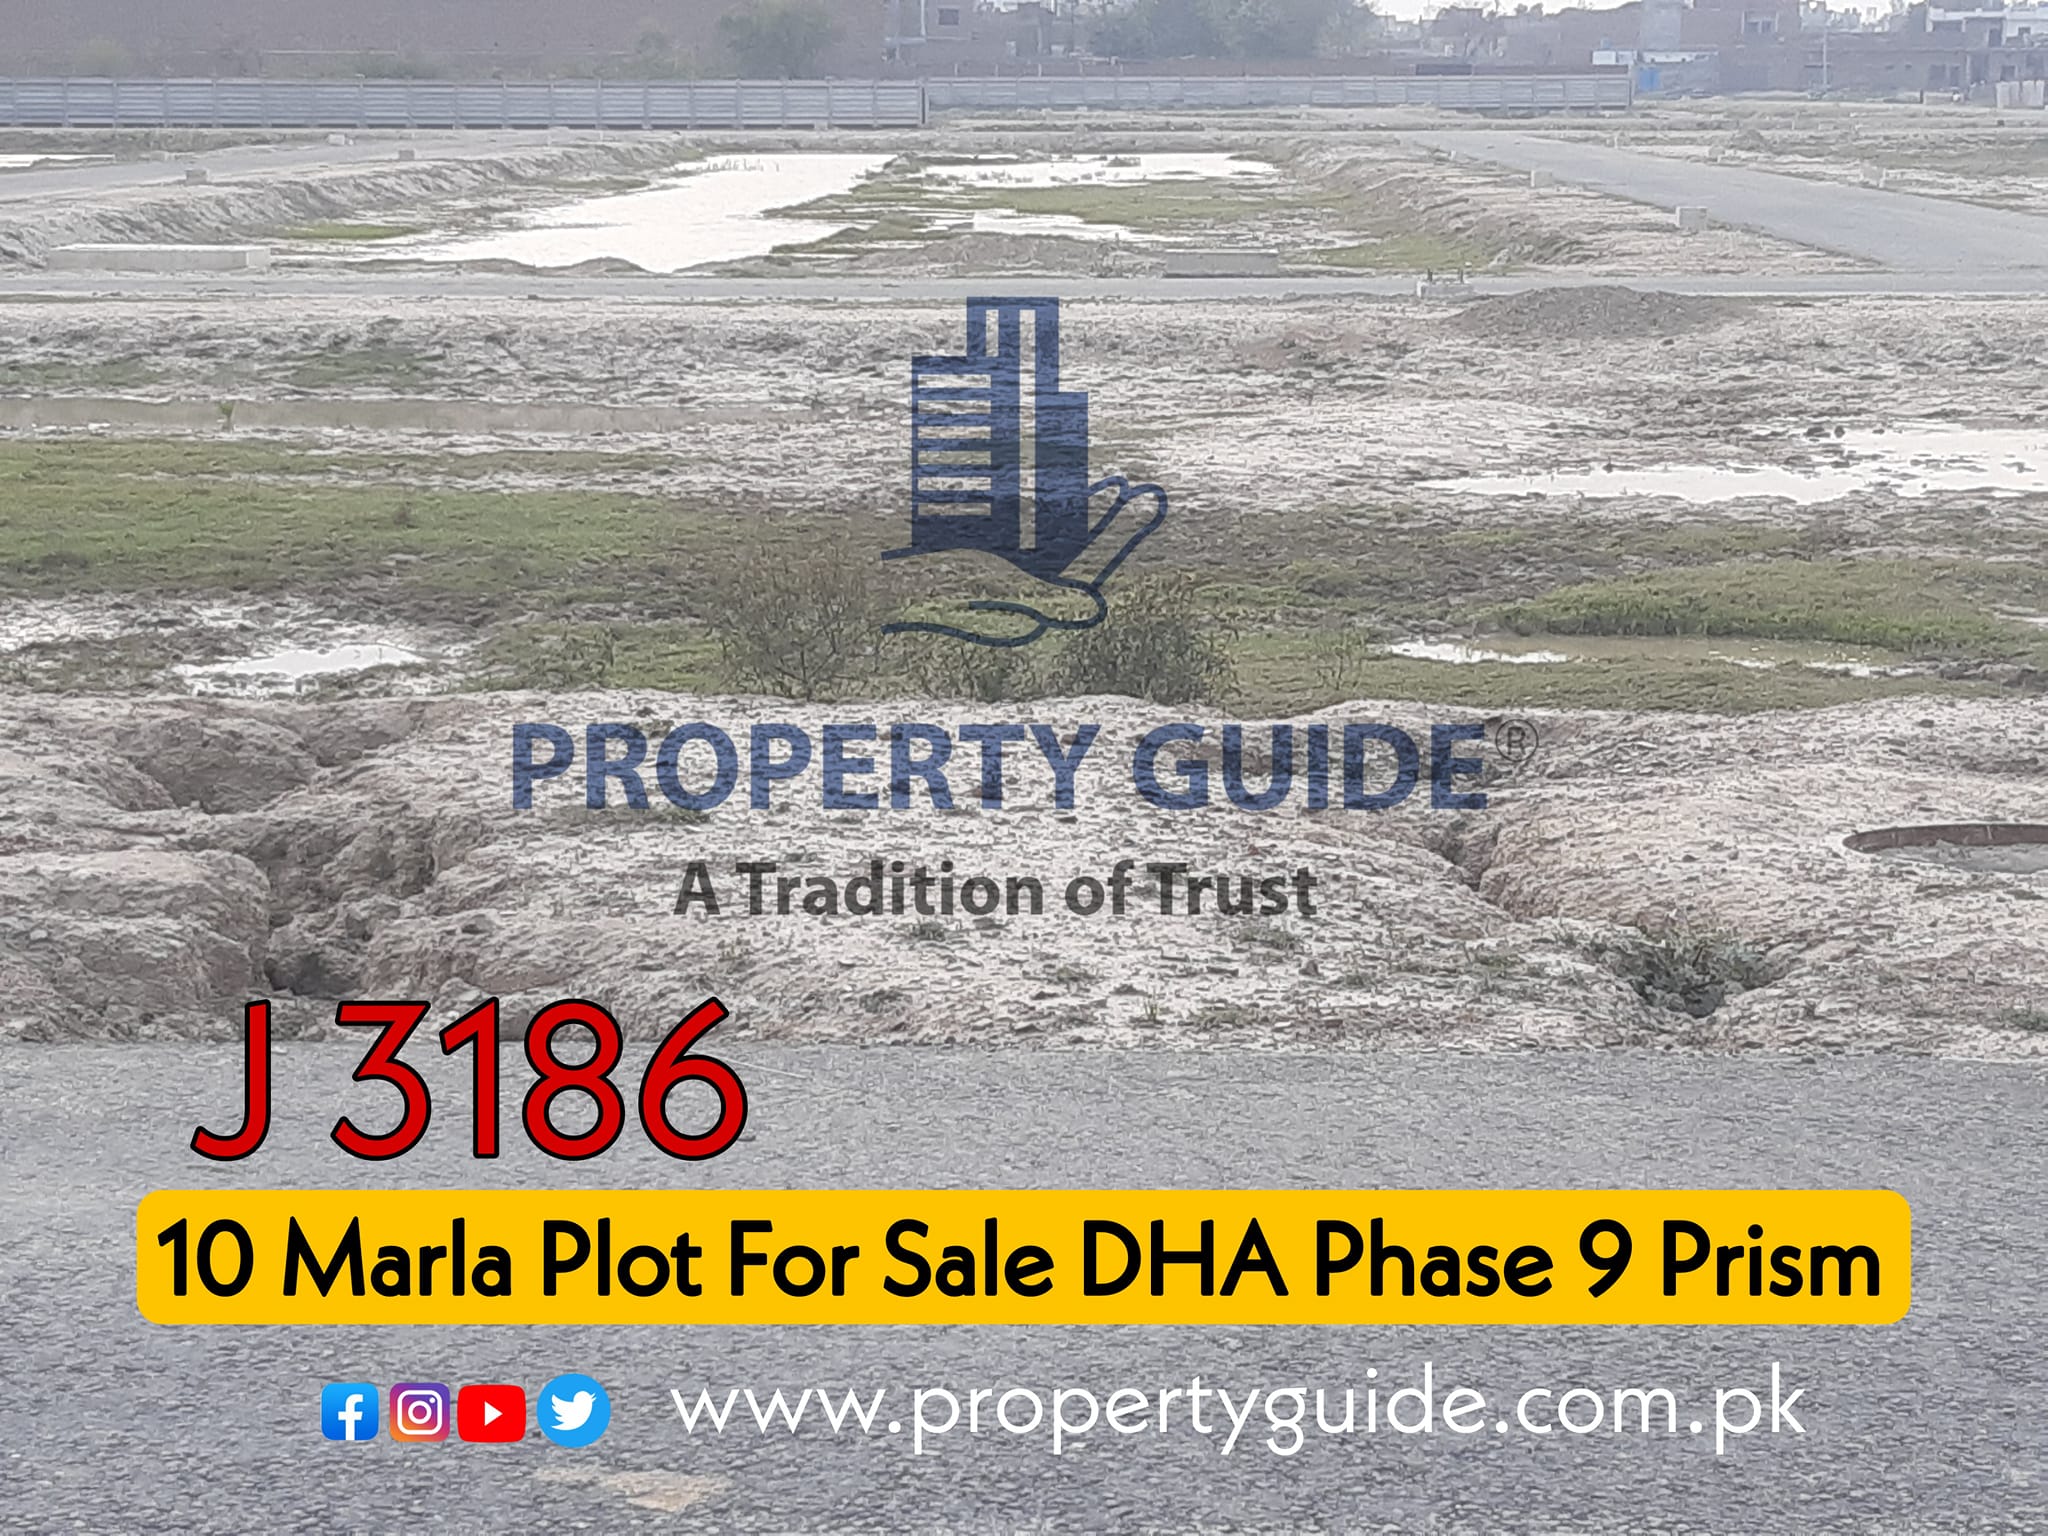 DHA Phase 9 Prism 10 Marla Plot Prices